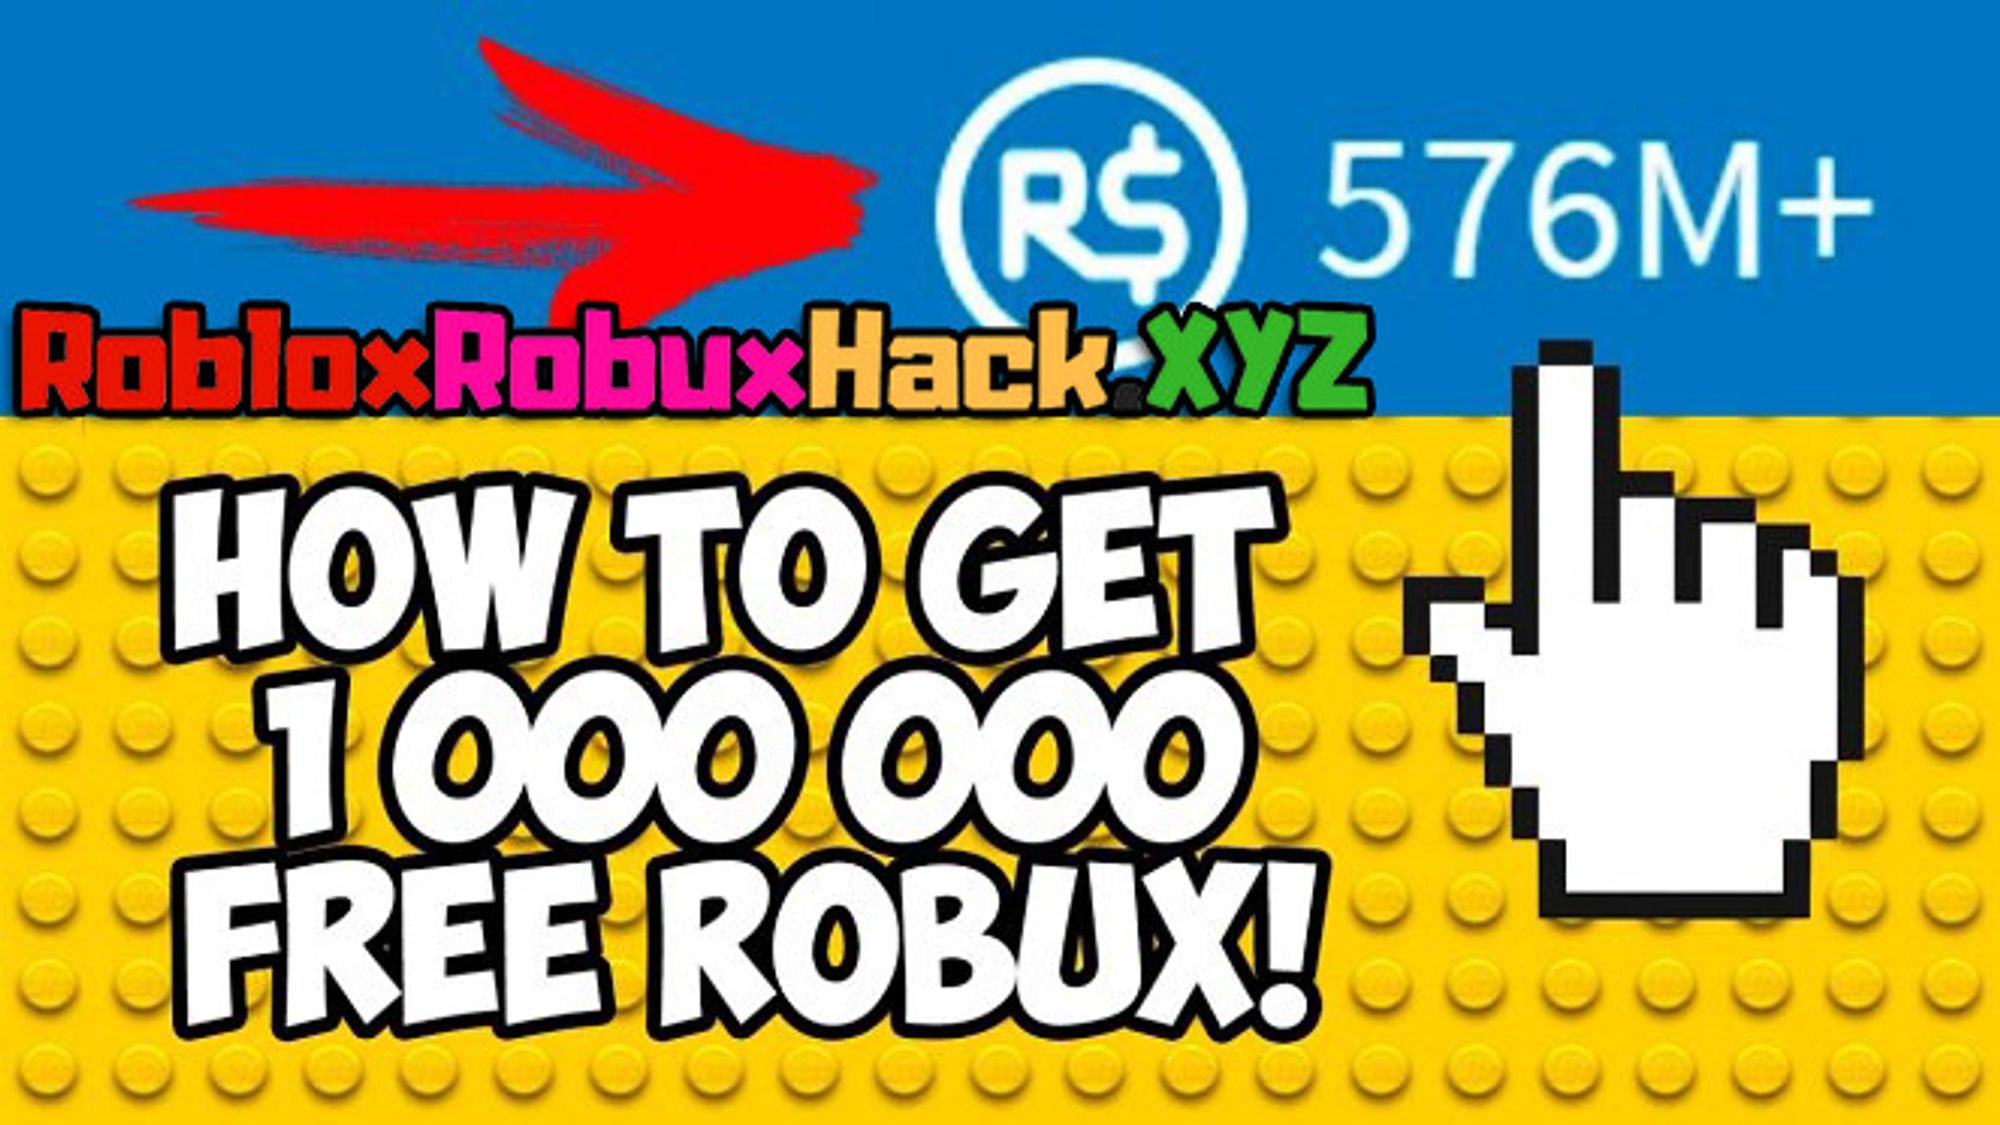 Roblox Free Robux Hack 2020 How To Get Free Robux - how to use cheat engine 64 on roblox for robux